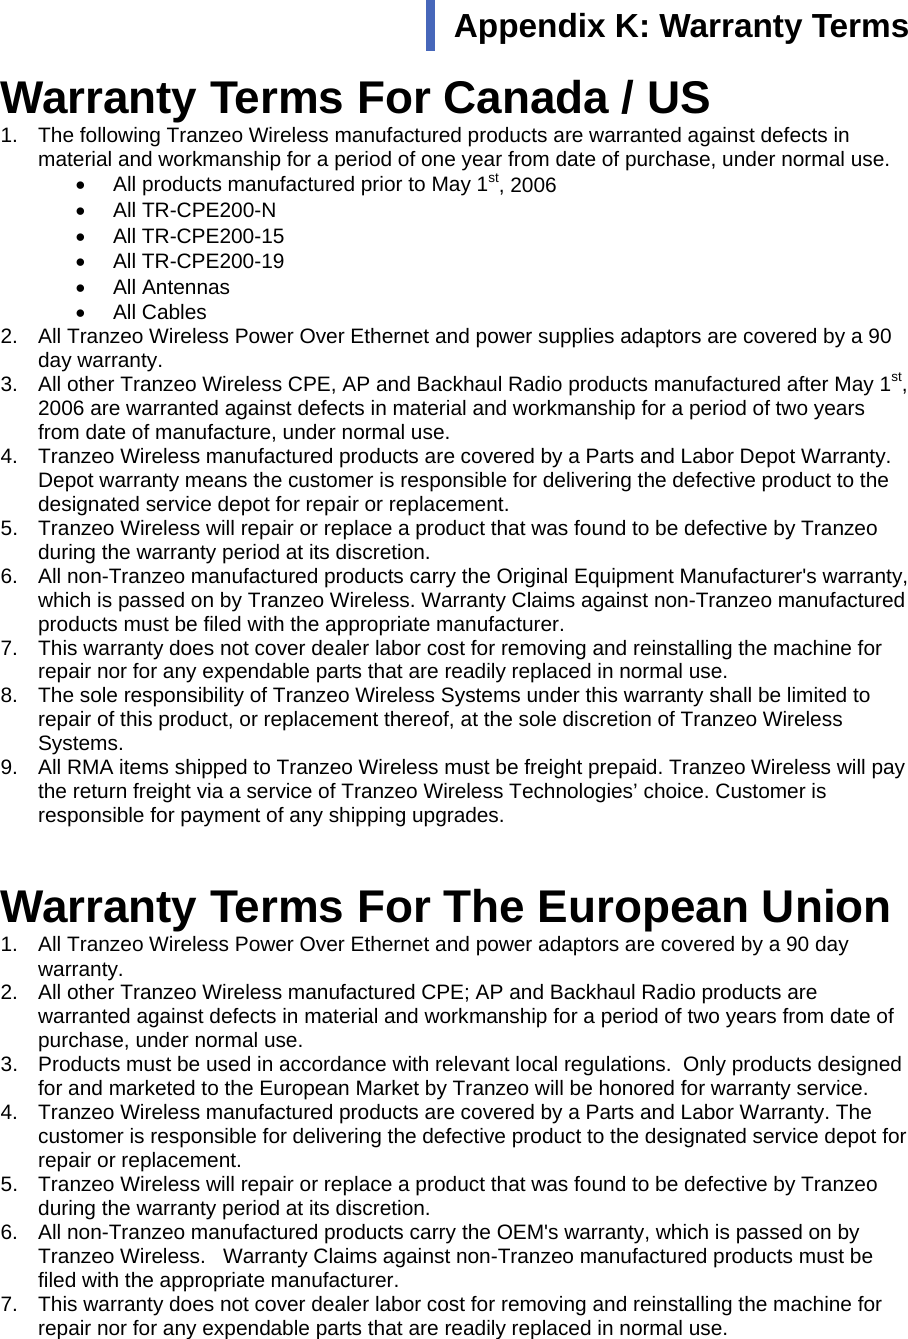  111 Warranty Terms For Canada / US 1.  The following Tranzeo Wireless manufactured products are warranted against defects in material and workmanship for a period of one year from date of purchase, under normal use. •  All products manufactured prior to May 1st, 2006 •  All TR-CPE200-N •  All TR-CPE200-15 •  All TR-CPE200-19 •  All Antennas •  All Cables 2.  All Tranzeo Wireless Power Over Ethernet and power supplies adaptors are covered by a 90 day warranty. 3.  All other Tranzeo Wireless CPE, AP and Backhaul Radio products manufactured after May 1st, 2006 are warranted against defects in material and workmanship for a period of two years from date of manufacture, under normal use. 4.  Tranzeo Wireless manufactured products are covered by a Parts and Labor Depot Warranty. Depot warranty means the customer is responsible for delivering the defective product to the designated service depot for repair or replacement. 5.  Tranzeo Wireless will repair or replace a product that was found to be defective by Tranzeo during the warranty period at its discretion. 6.  All non-Tranzeo manufactured products carry the Original Equipment Manufacturer&apos;s warranty, which is passed on by Tranzeo Wireless. Warranty Claims against non-Tranzeo manufactured products must be filed with the appropriate manufacturer. 7.  This warranty does not cover dealer labor cost for removing and reinstalling the machine for repair nor for any expendable parts that are readily replaced in normal use. 8.  The sole responsibility of Tranzeo Wireless Systems under this warranty shall be limited to repair of this product, or replacement thereof, at the sole discretion of Tranzeo Wireless Systems. 9.  All RMA items shipped to Tranzeo Wireless must be freight prepaid. Tranzeo Wireless will pay the return freight via a service of Tranzeo Wireless Technologies’ choice. Customer is responsible for payment of any shipping upgrades.  Warranty Terms For The European Union 1.  All Tranzeo Wireless Power Over Ethernet and power adaptors are covered by a 90 day warranty. 2.  All other Tranzeo Wireless manufactured CPE; AP and Backhaul Radio products are warranted against defects in material and workmanship for a period of two years from date of purchase, under normal use. 3.  Products must be used in accordance with relevant local regulations.  Only products designed for and marketed to the European Market by Tranzeo will be honored for warranty service. 4.  Tranzeo Wireless manufactured products are covered by a Parts and Labor Warranty. The customer is responsible for delivering the defective product to the designated service depot for repair or replacement. 5.  Tranzeo Wireless will repair or replace a product that was found to be defective by Tranzeo during the warranty period at its discretion. 6.  All non-Tranzeo manufactured products carry the OEM&apos;s warranty, which is passed on by Tranzeo Wireless.   Warranty Claims against non-Tranzeo manufactured products must be filed with the appropriate manufacturer. 7.  This warranty does not cover dealer labor cost for removing and reinstalling the machine for repair nor for any expendable parts that are readily replaced in normal use. Appendix K: Warranty Terms  